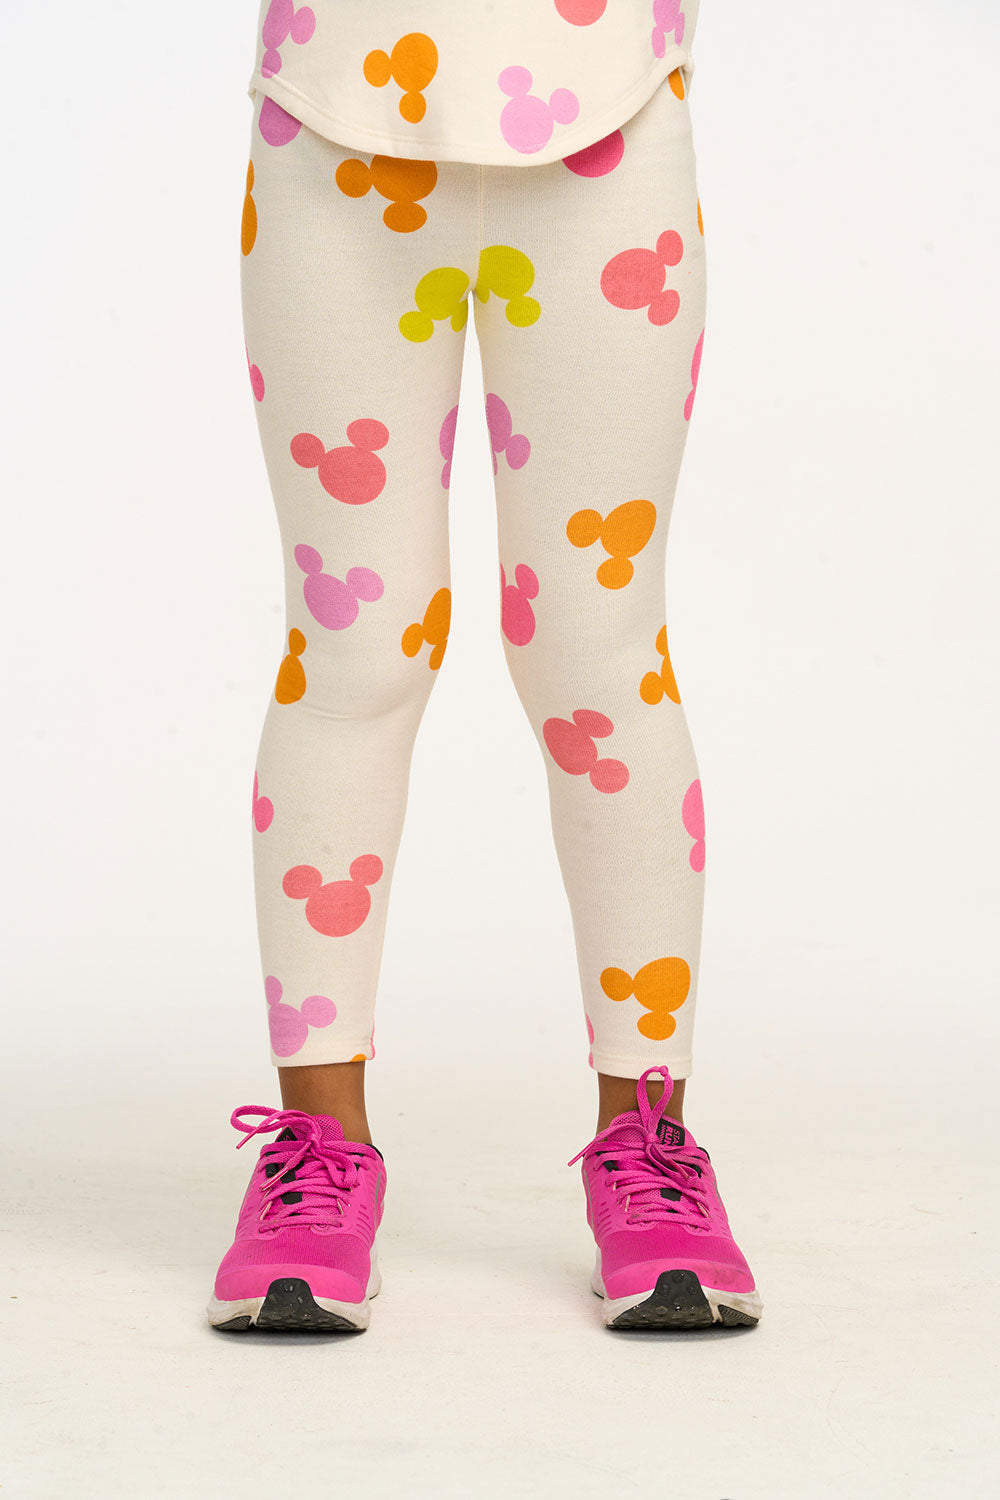 Toddler White Minnie Mouse Tights - Mickey and Friends 